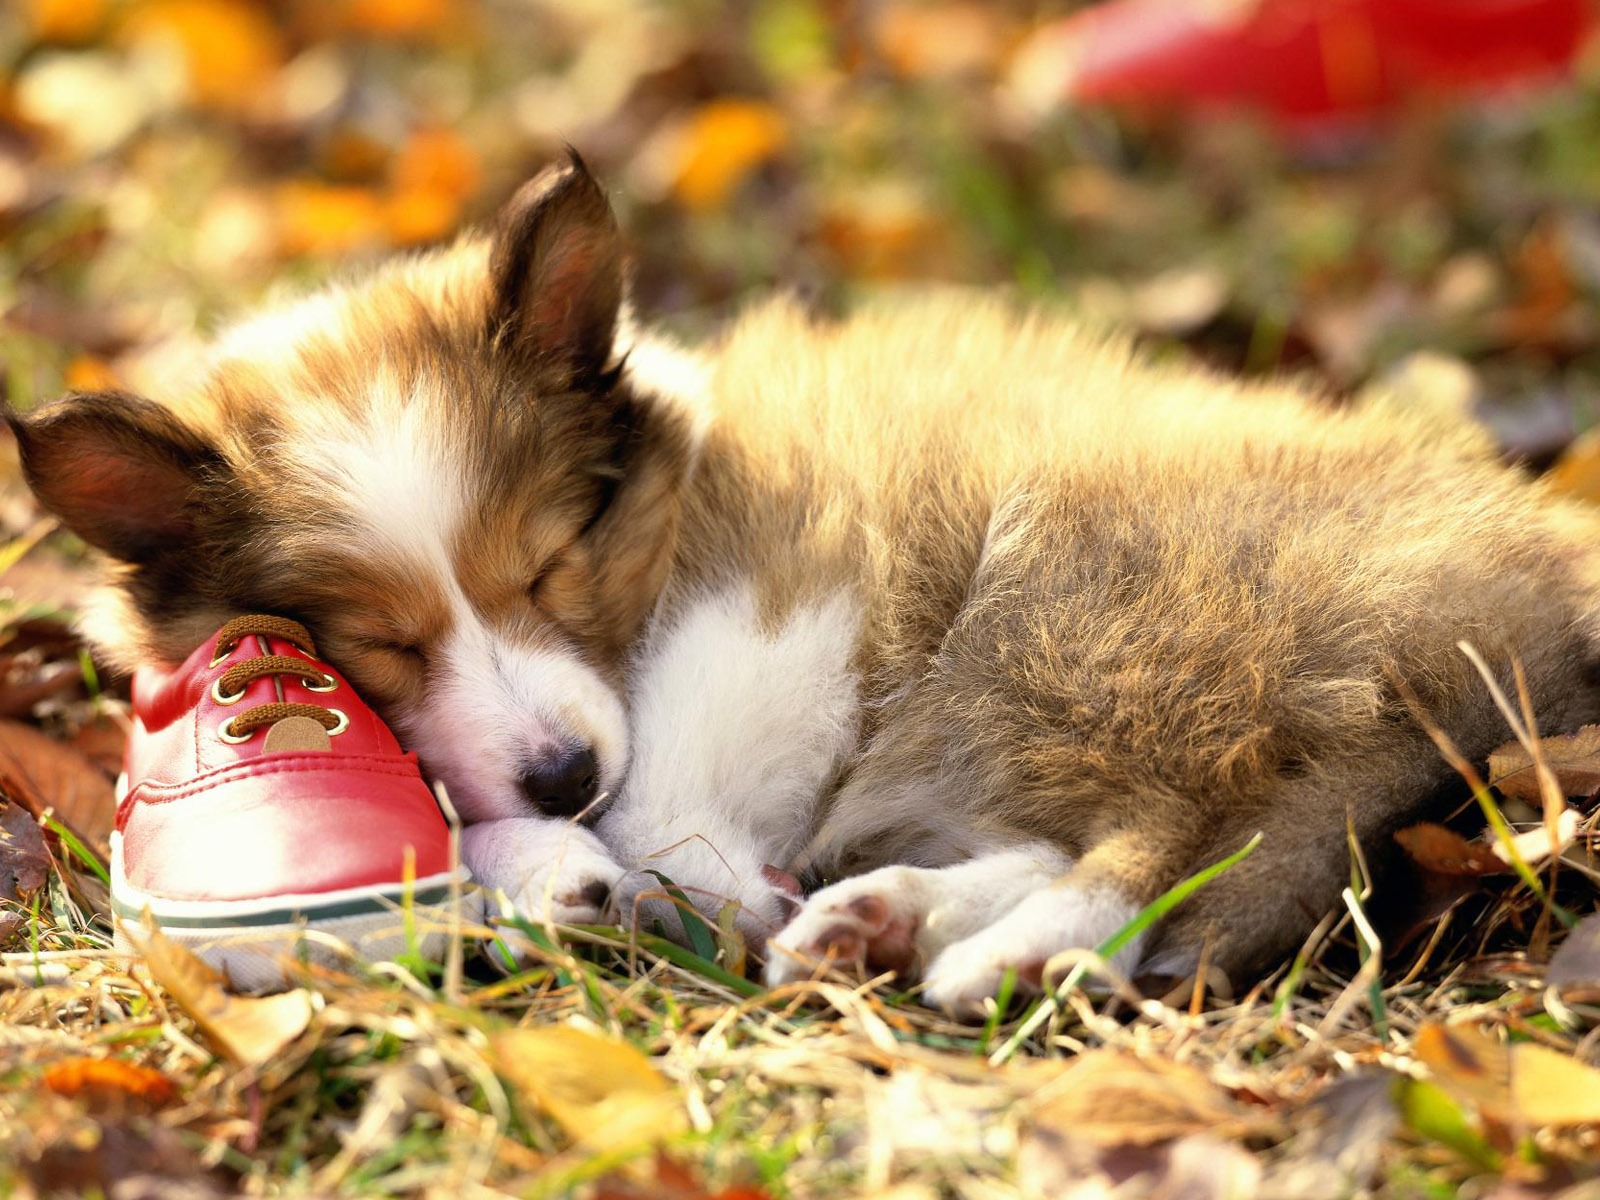 Puppy Photo HD wallpapers (3) #14 - 1600x1200